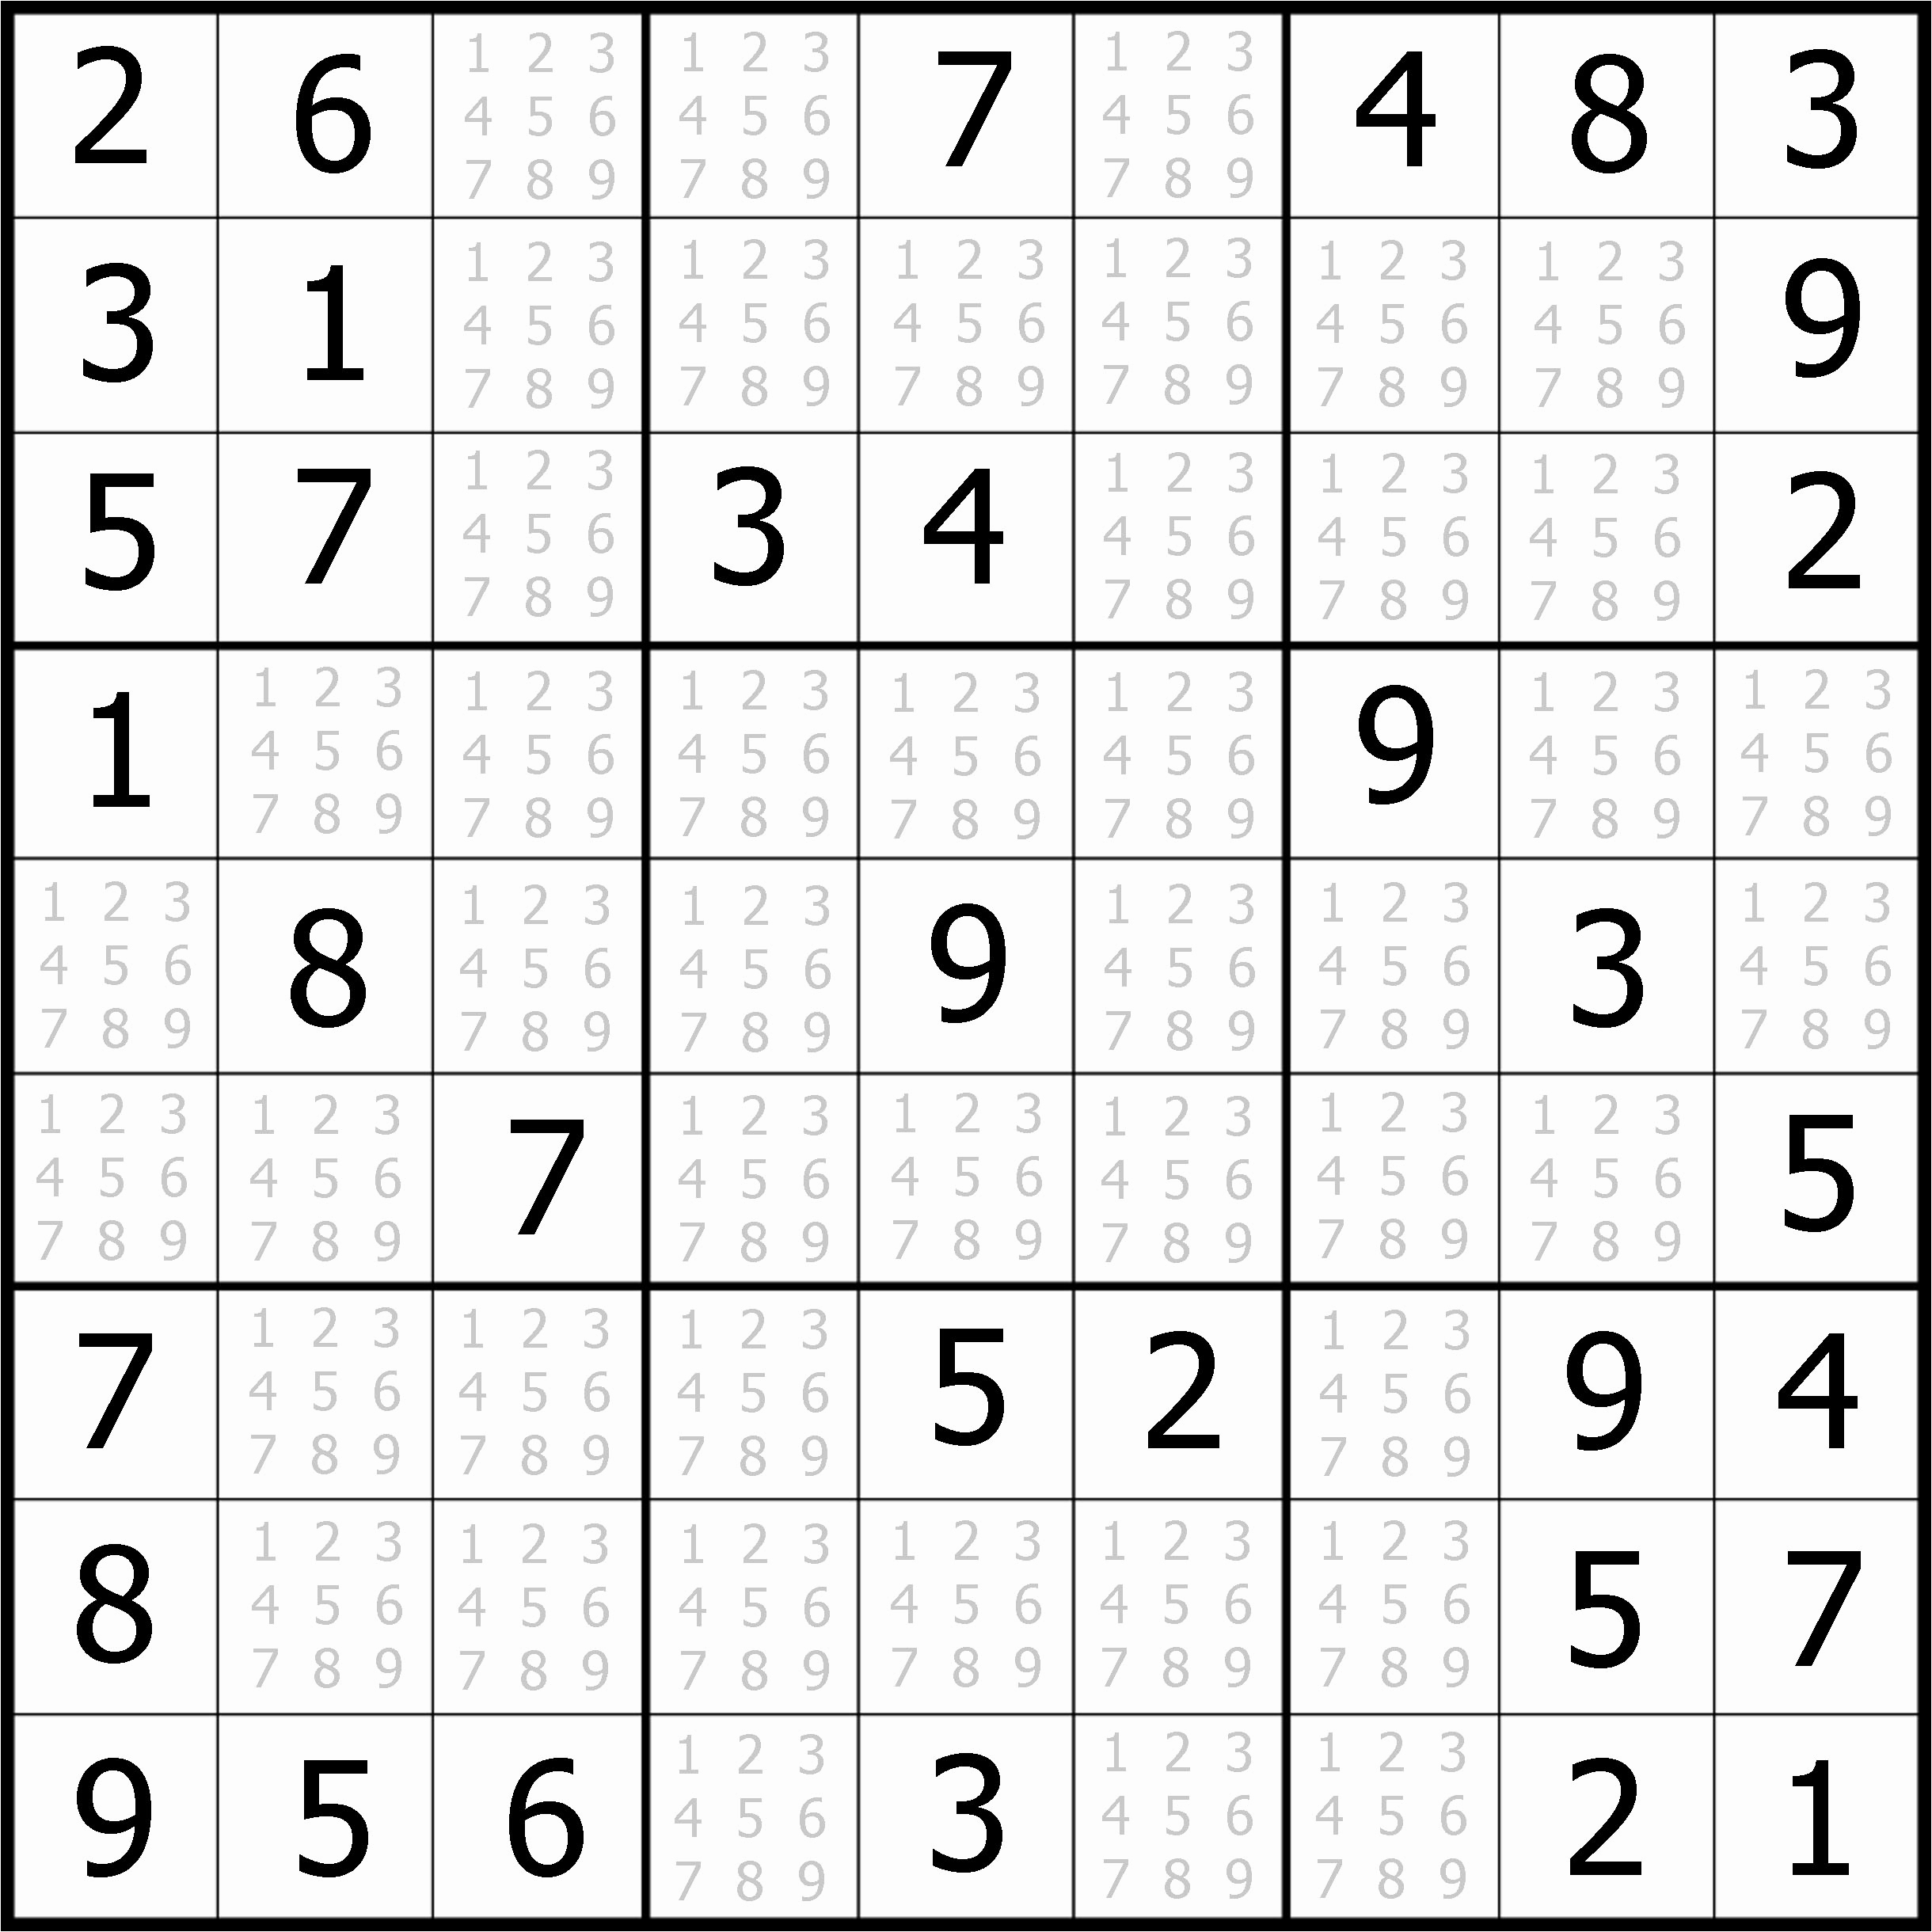 Easy Sudoku Puzzles To Print Free Download Featured Sudoku Puzzle To - Printable Sudoku Puzzles Easy